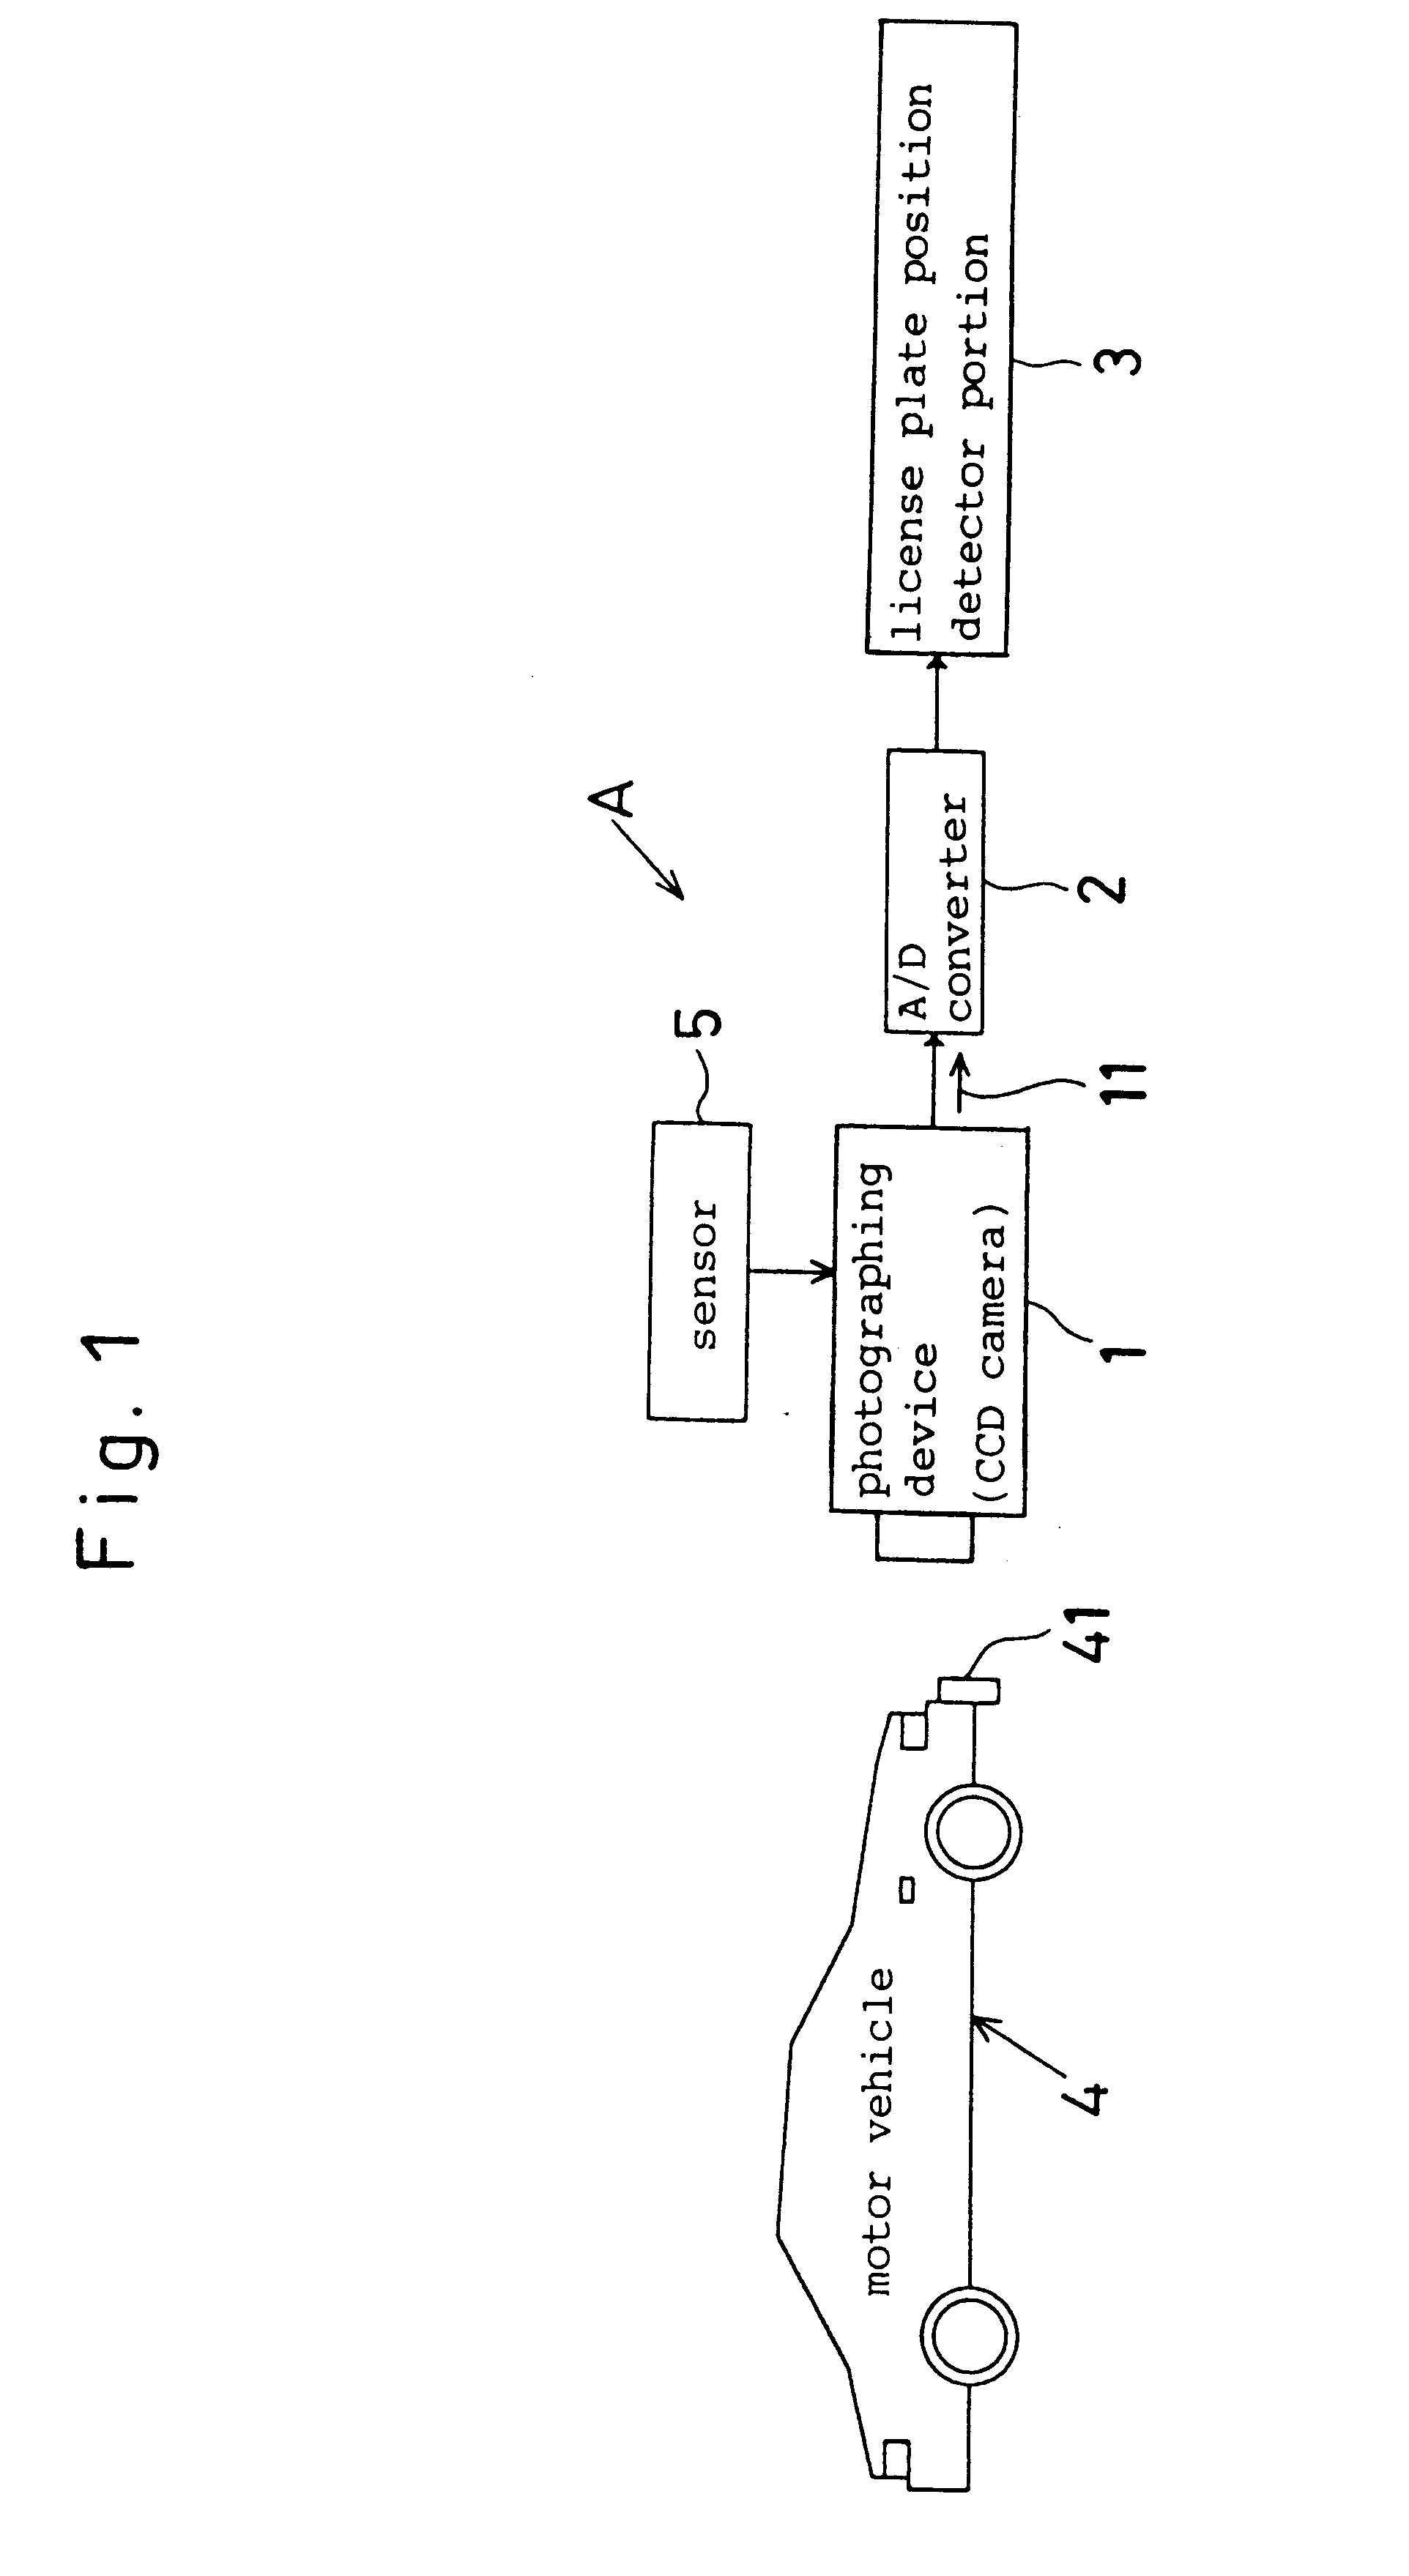 Positional detector device for a vehicular license plate